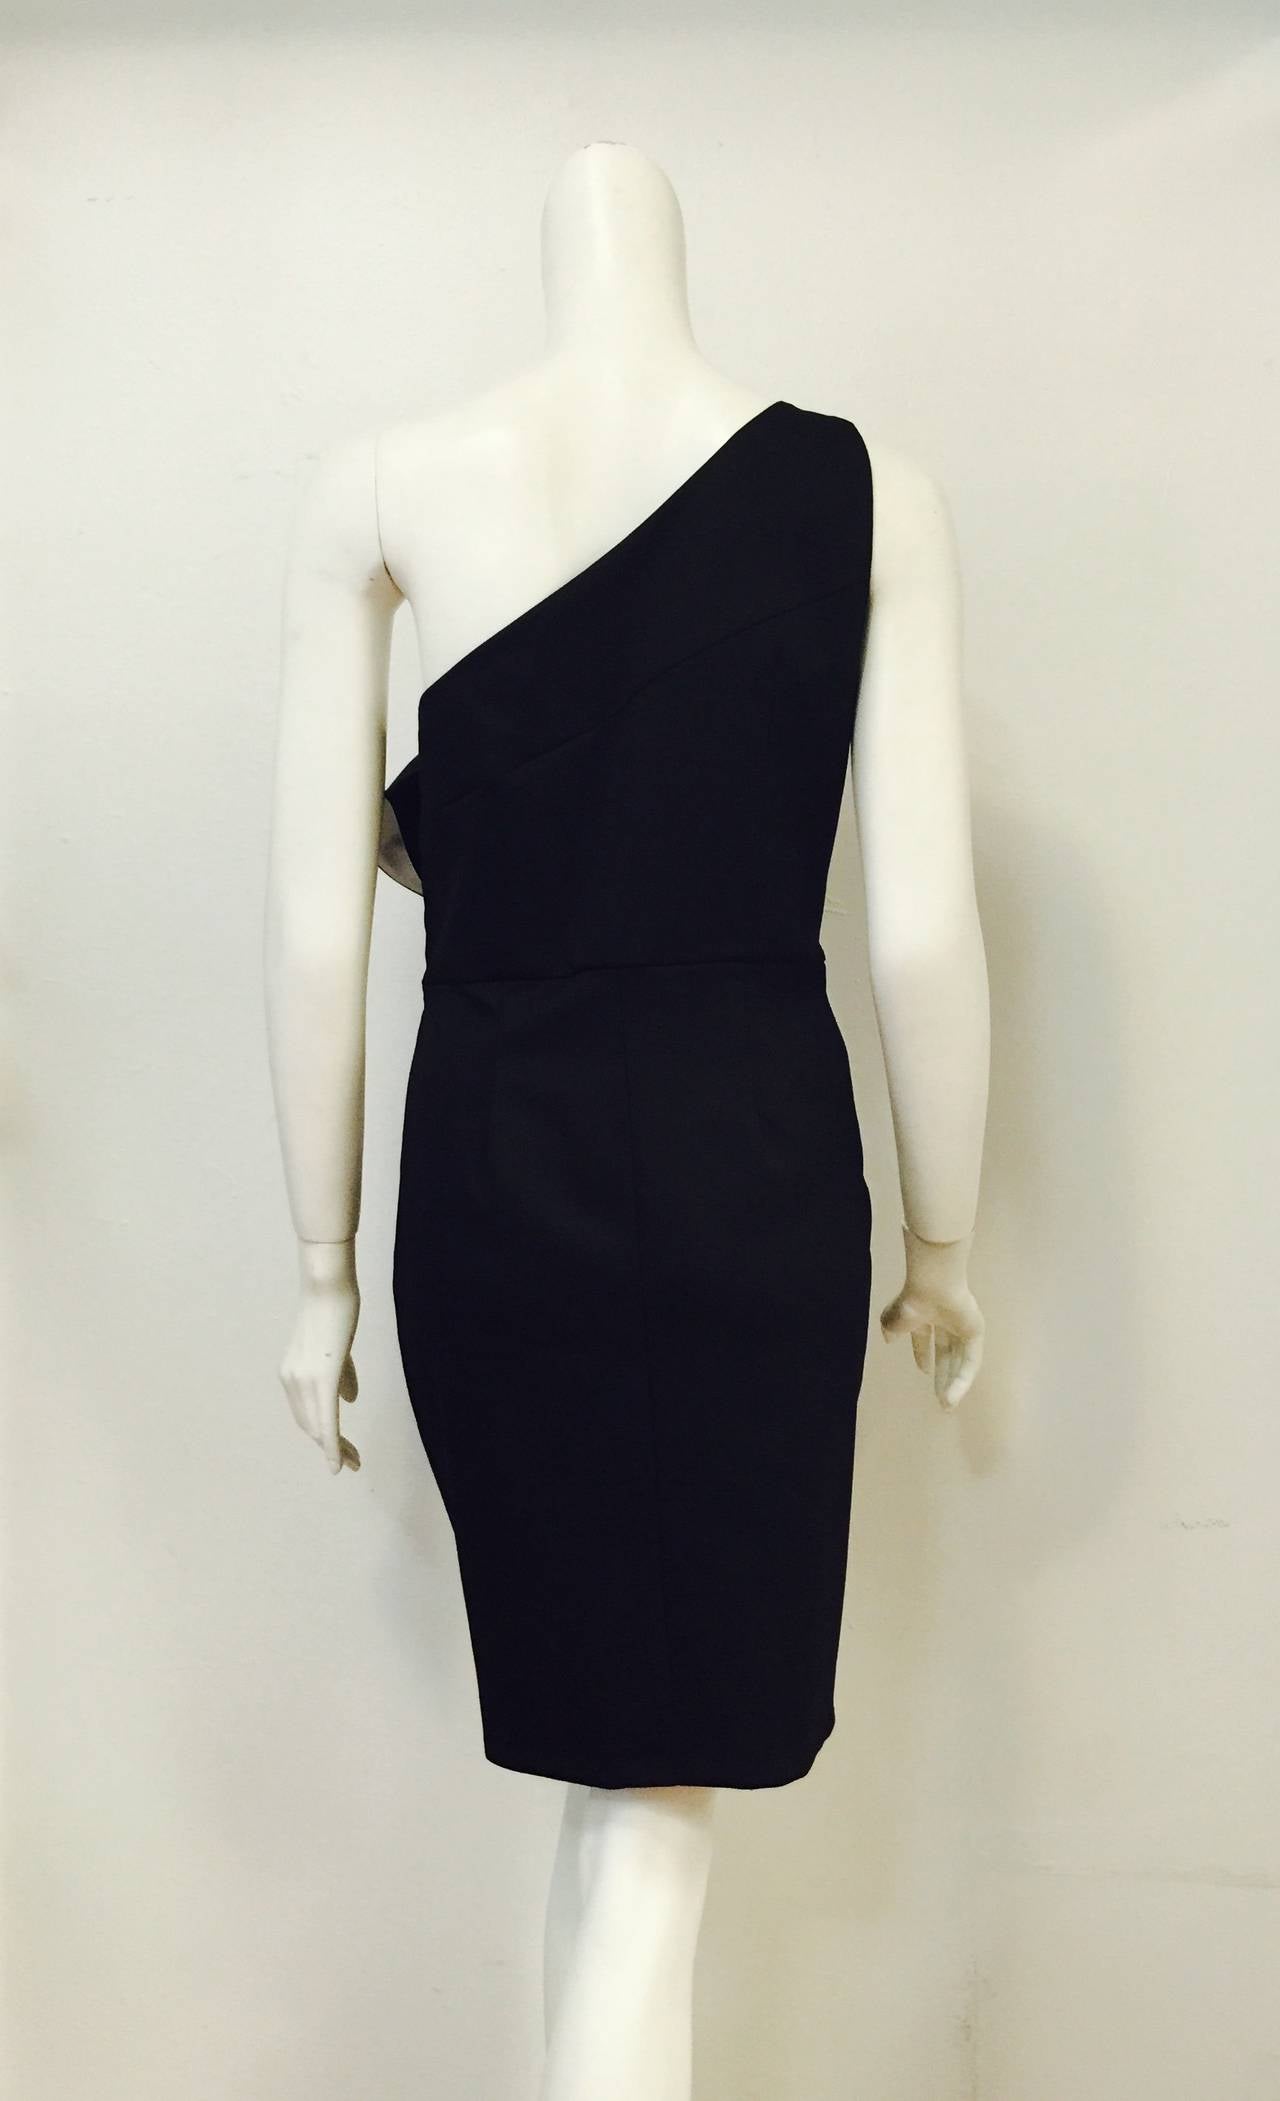 Valentino Technocouture One Shoulder Cocktail Dress With Bow In Excellent Condition For Sale In Palm Beach, FL